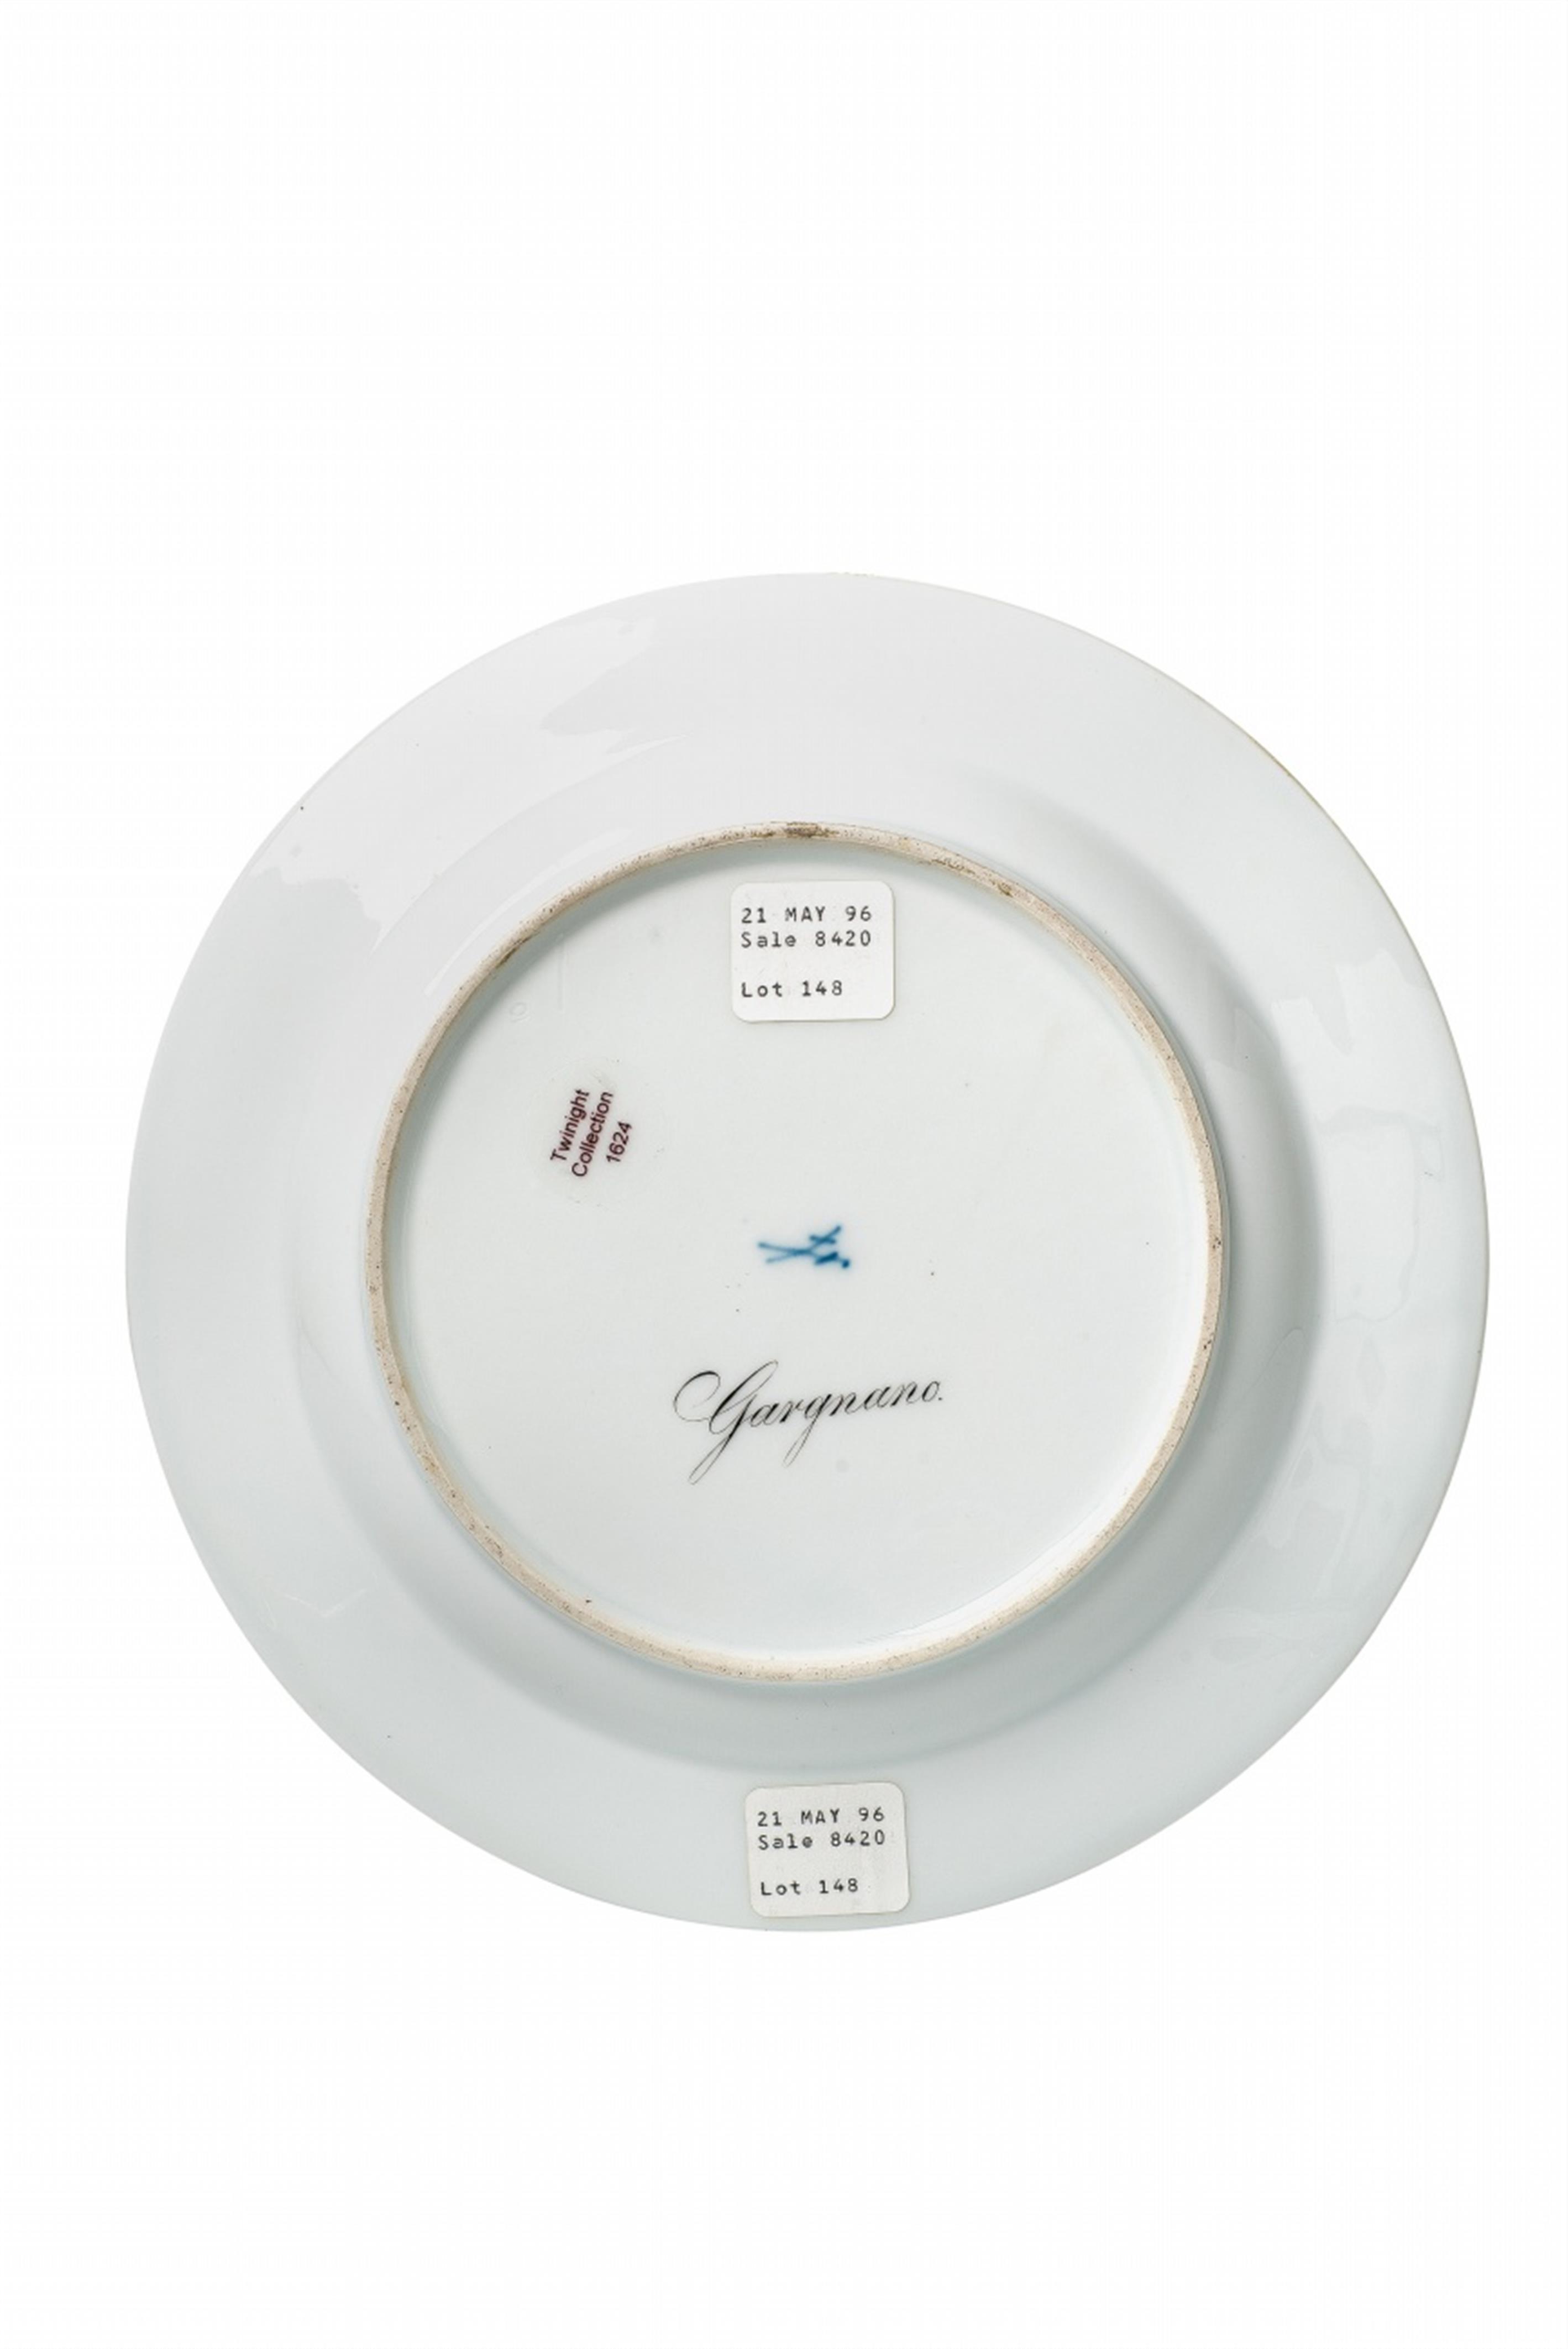 A Meissen porcelain plate with a view of Gargnano on Lake Garda - image-2